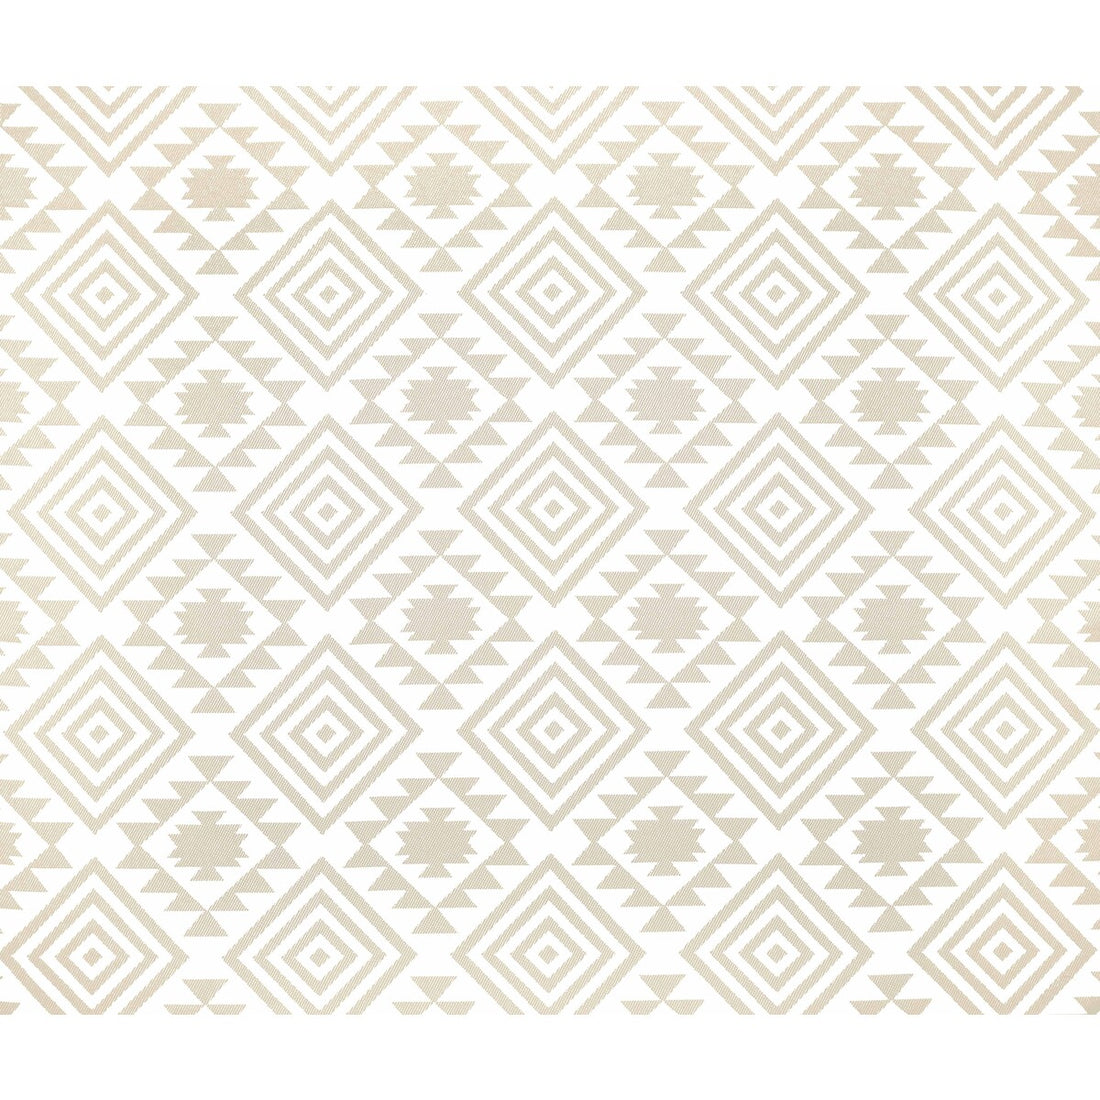 Ava fabric in beige color - pattern GDT5383.7.0 - by Gaston y Daniela in the Gaston Africalia collection